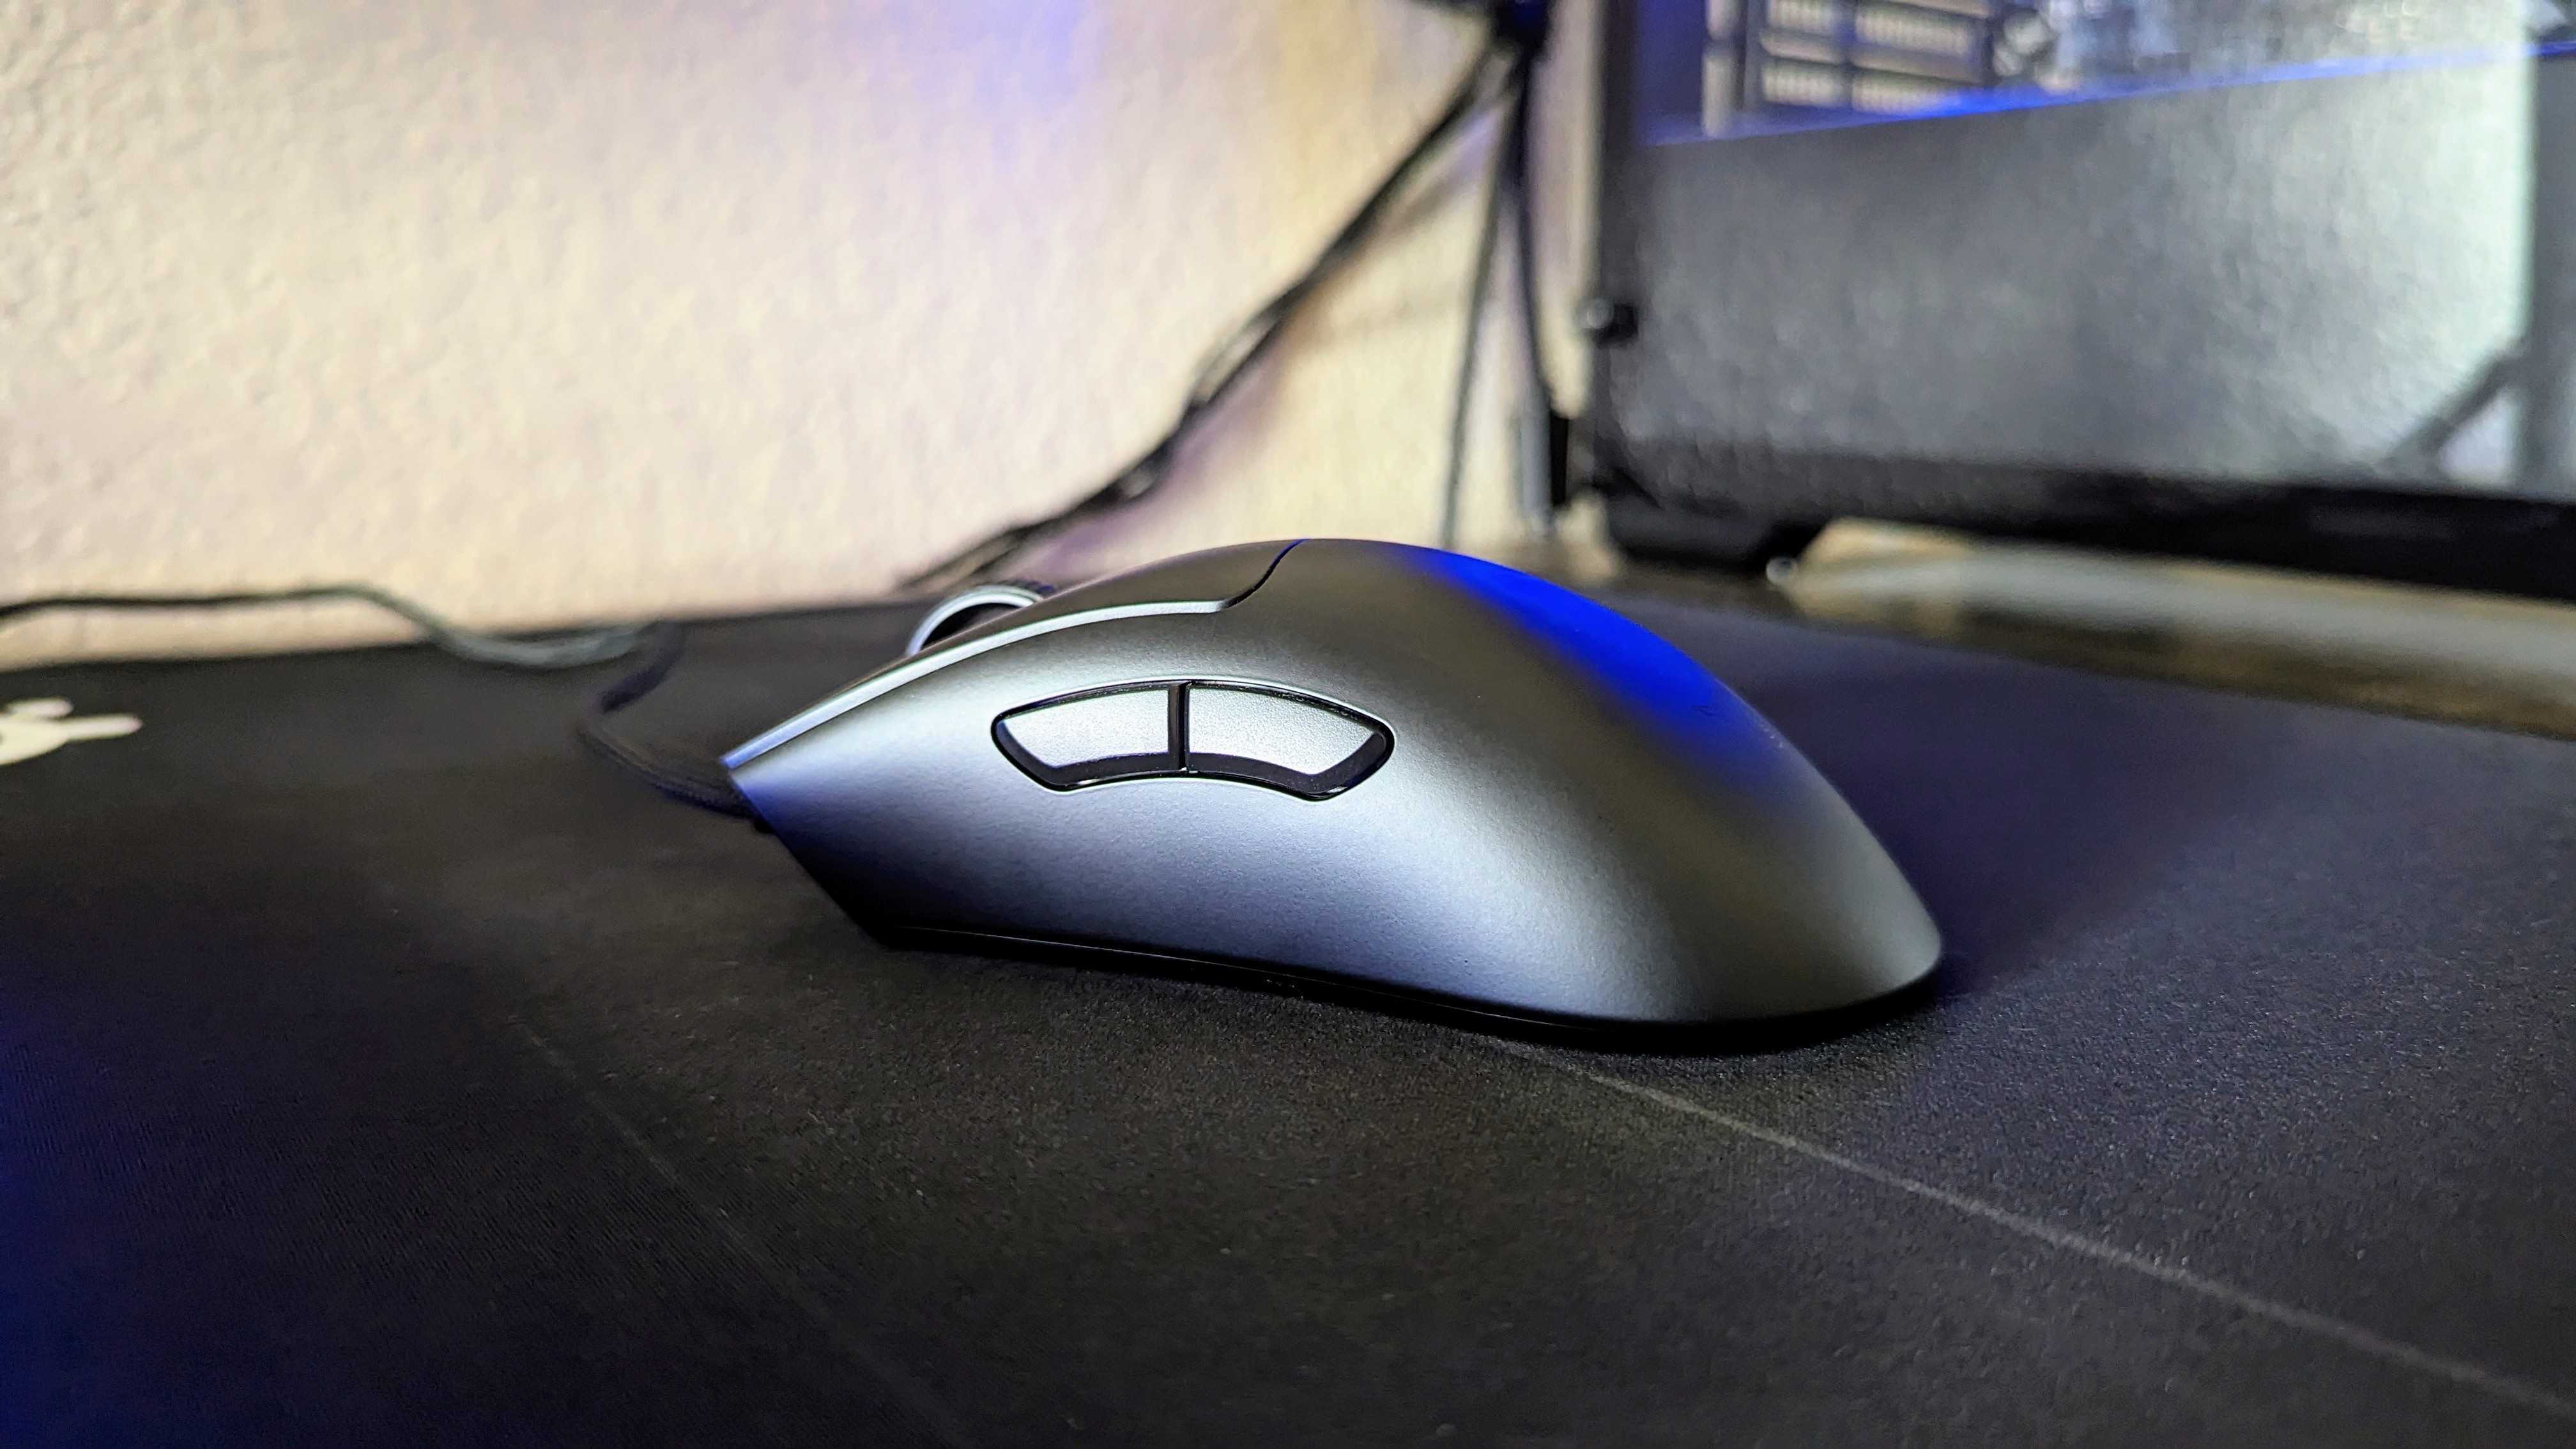 The Razer DeathAdder V3 on a mousepad, as seen from the side.